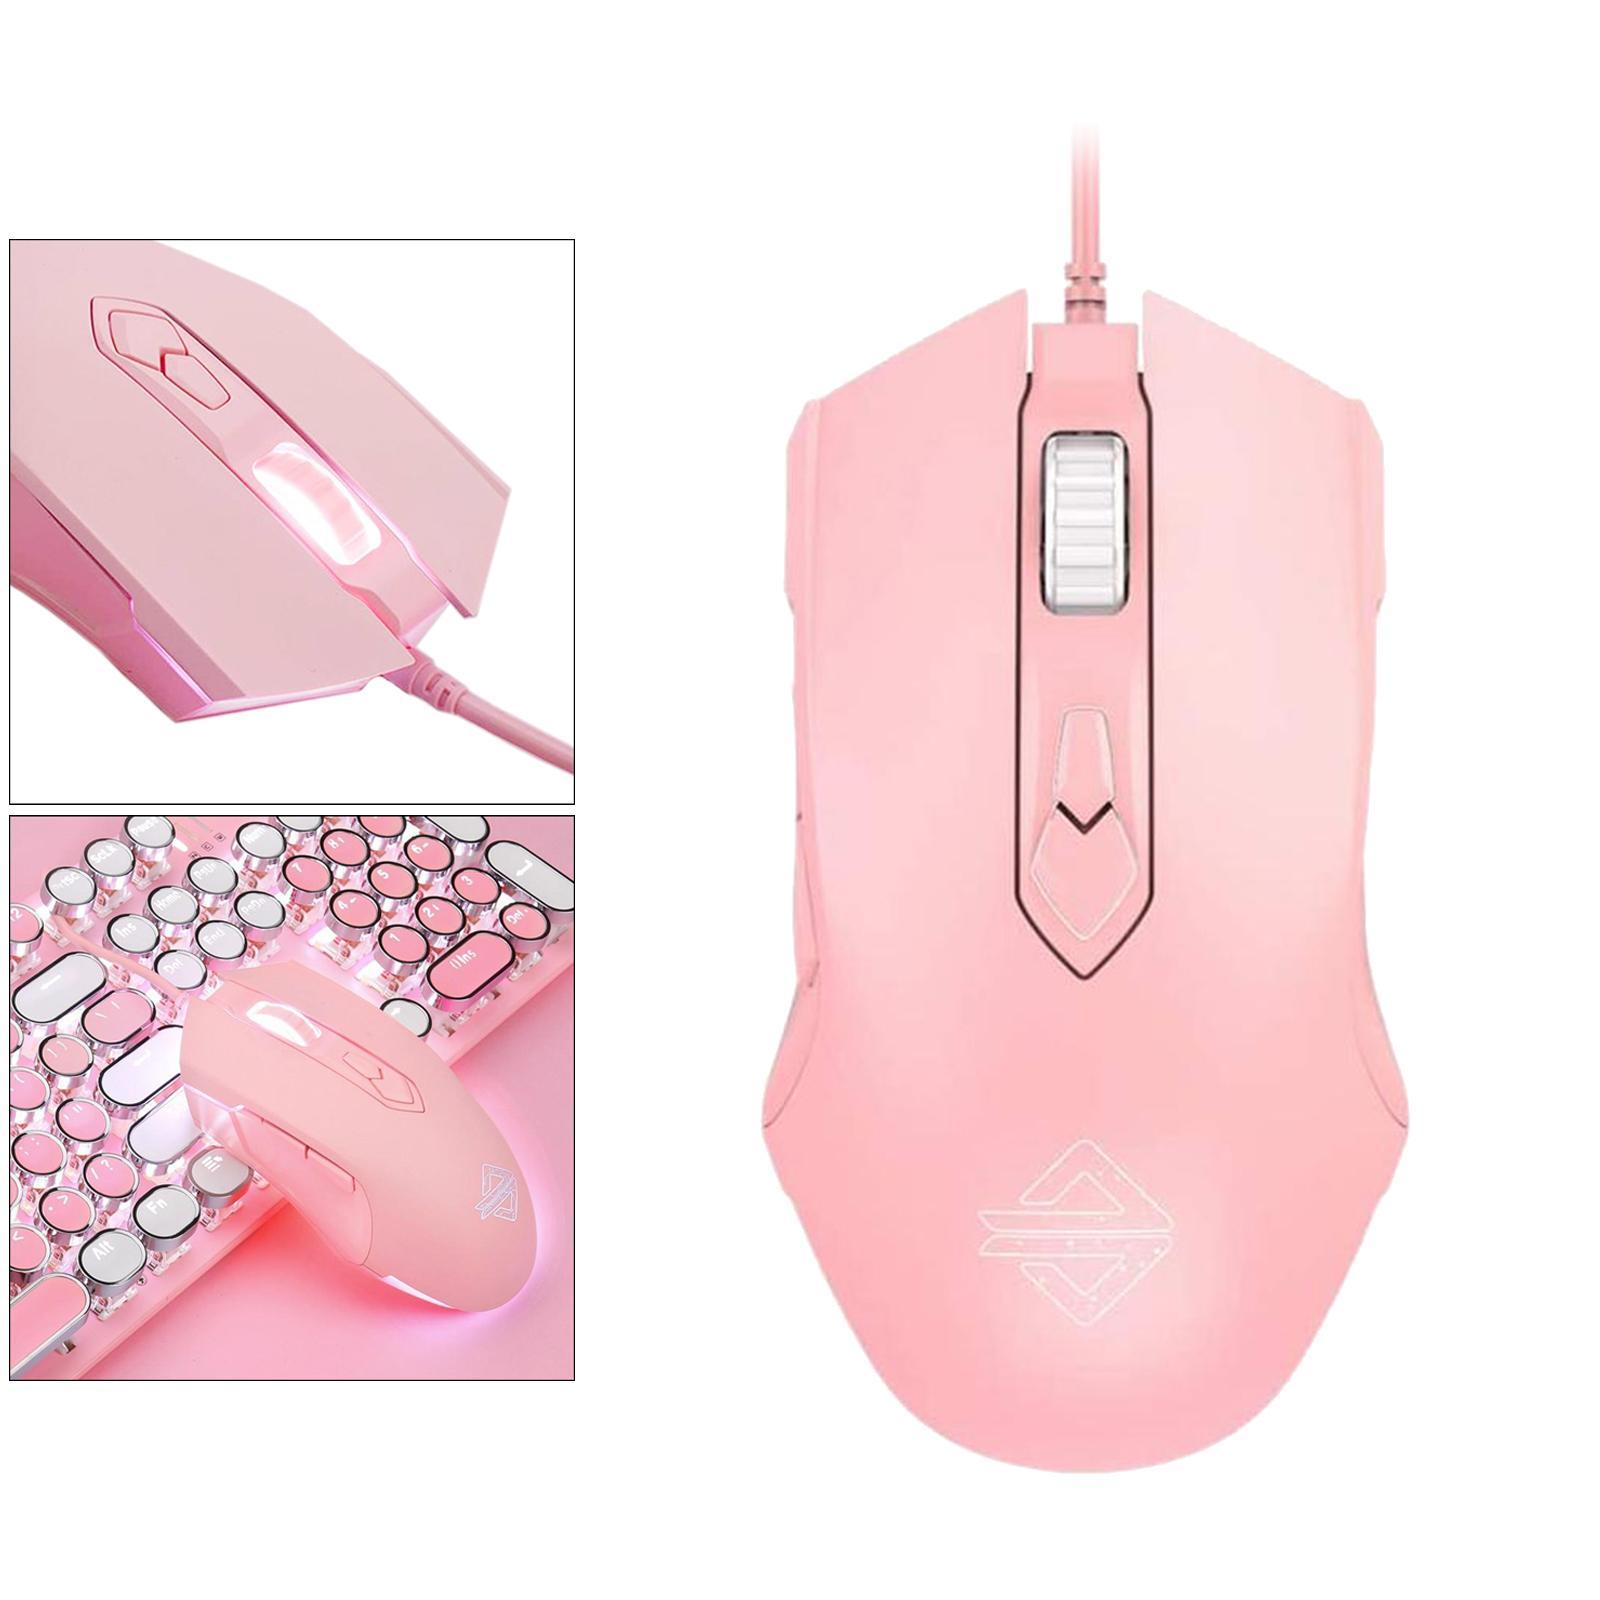 Laptop Mouse 7 Buttons for Windows 7/8/10 / XP Linux with 2500 DPI Breathing